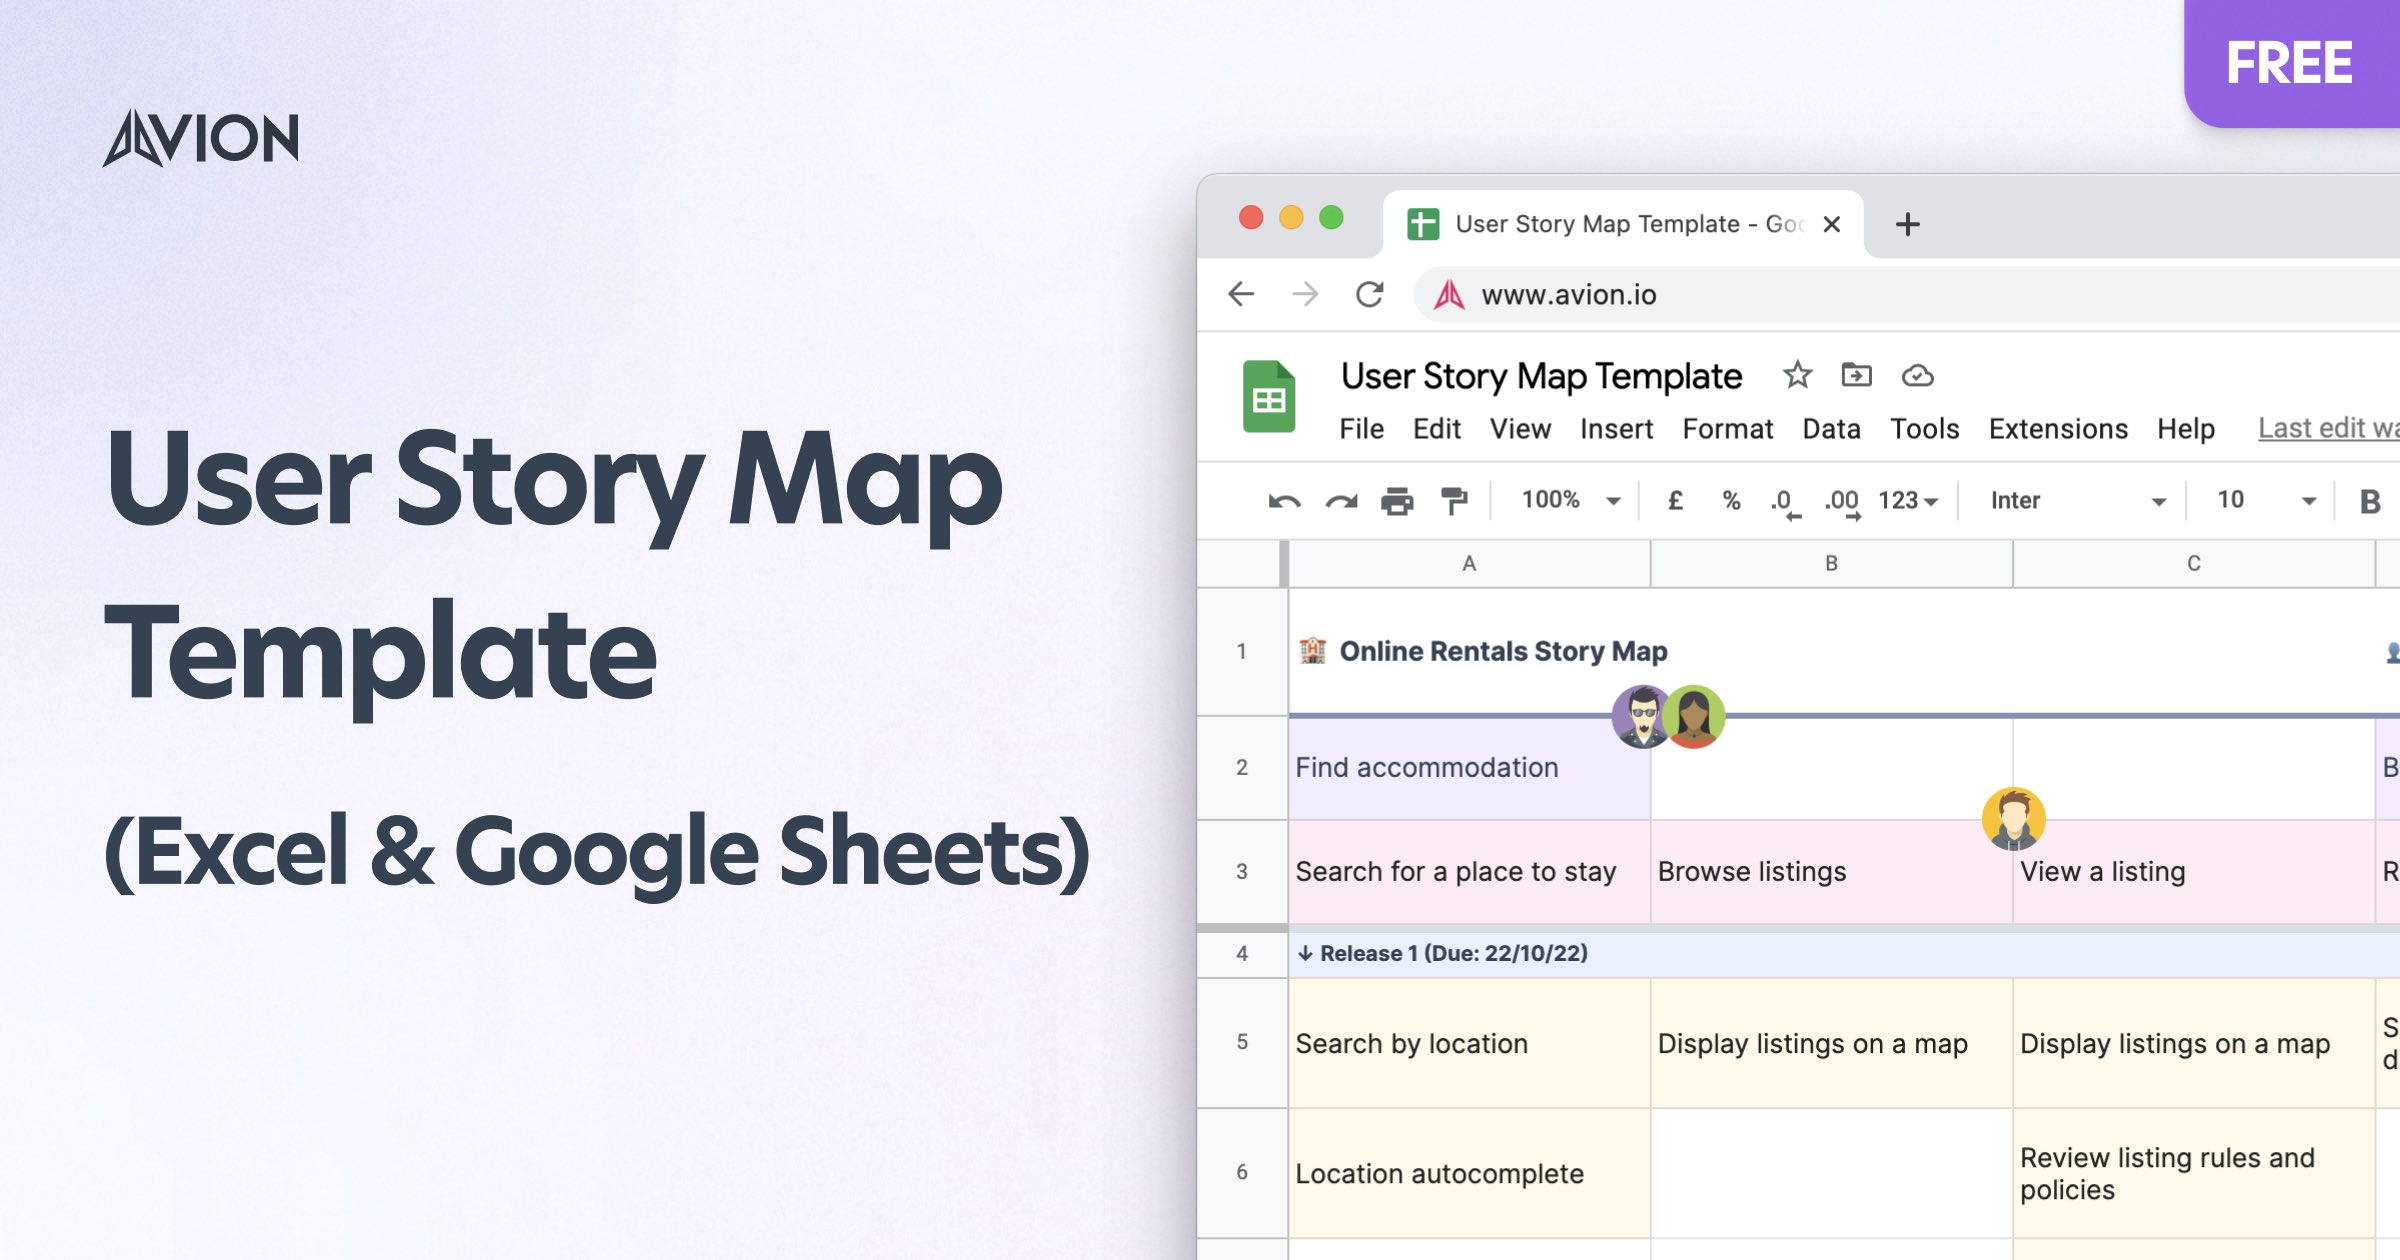 User story mapping template for spreadsheets, Excel (XLSX) and Google Sheets